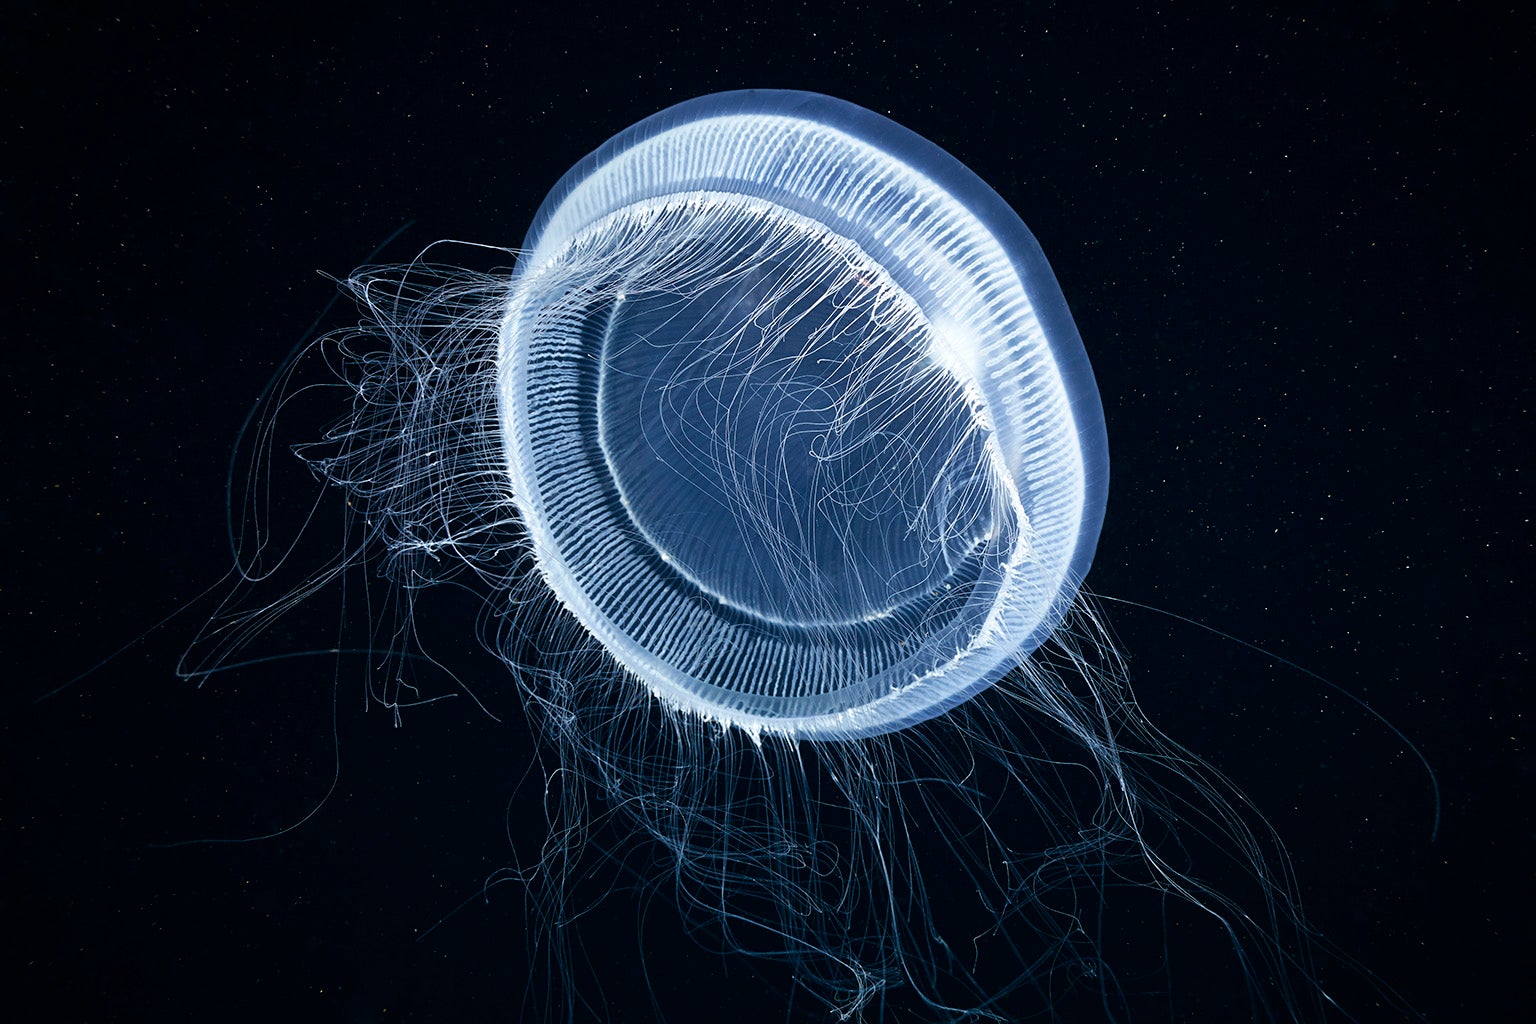 See Iridescent Jellyfish and Glowing Wonders of the Sea in World